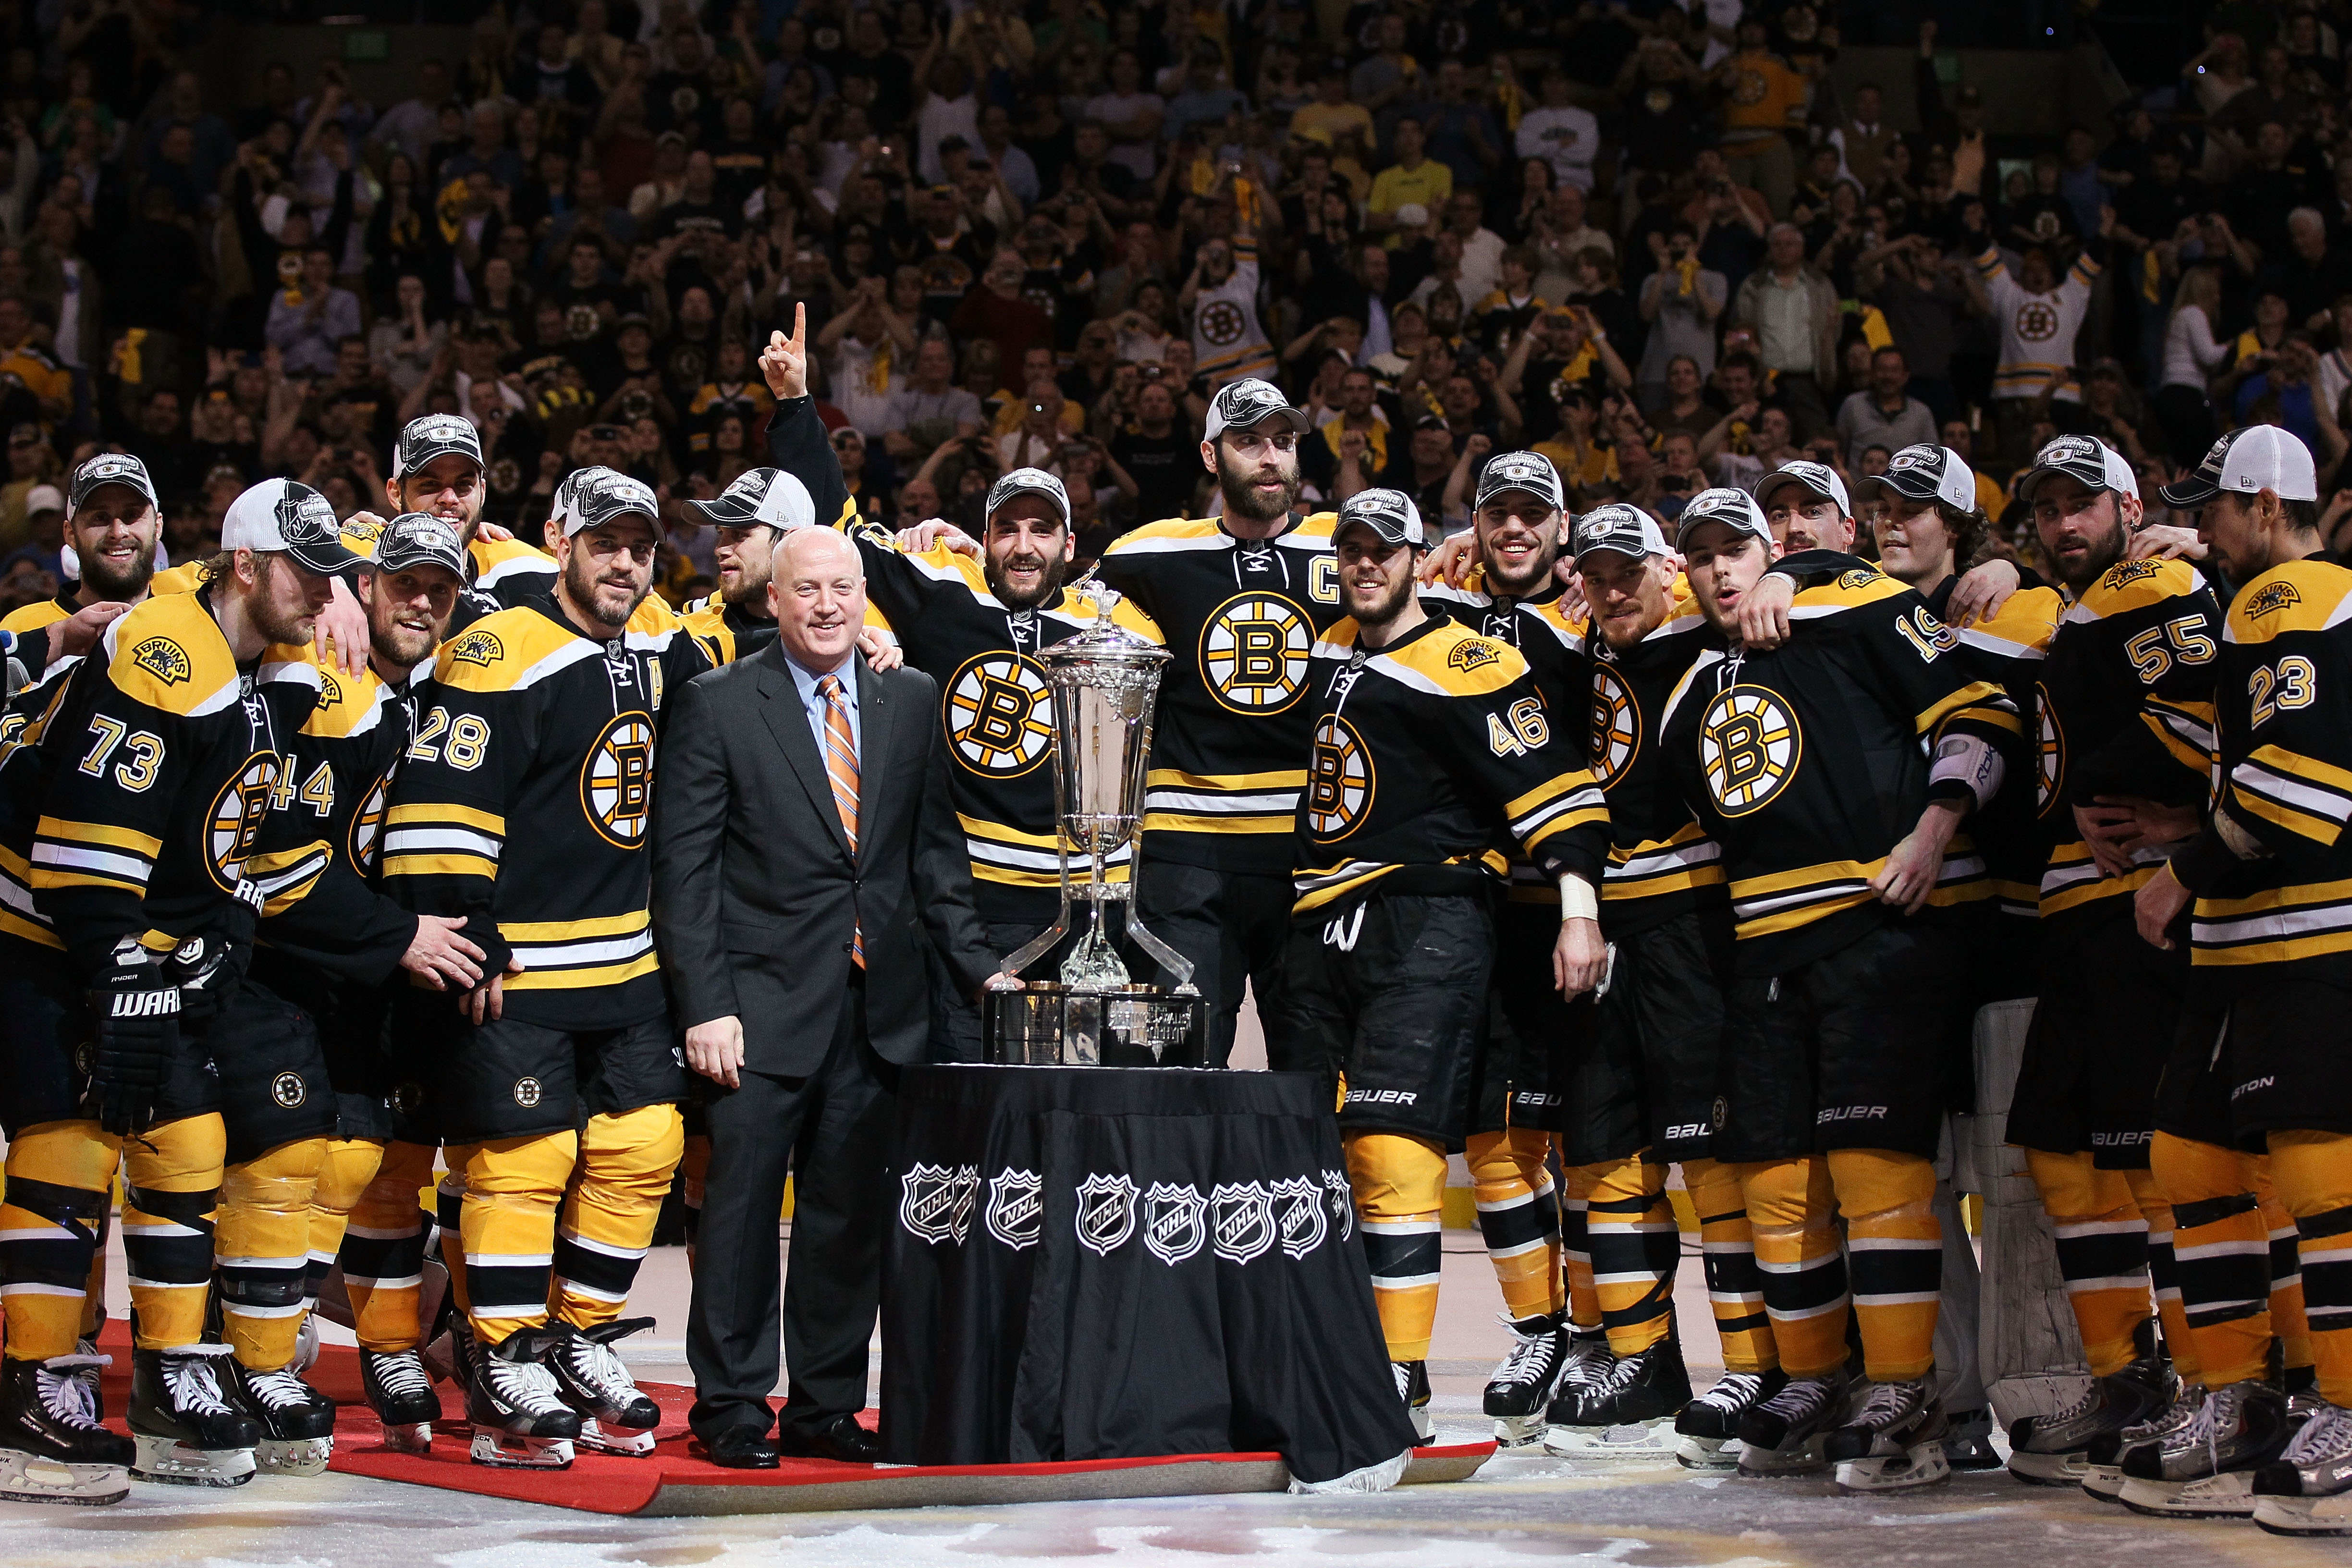 Poll: Who will win the 2011 Stanley Cup finals - the Boston Bruins